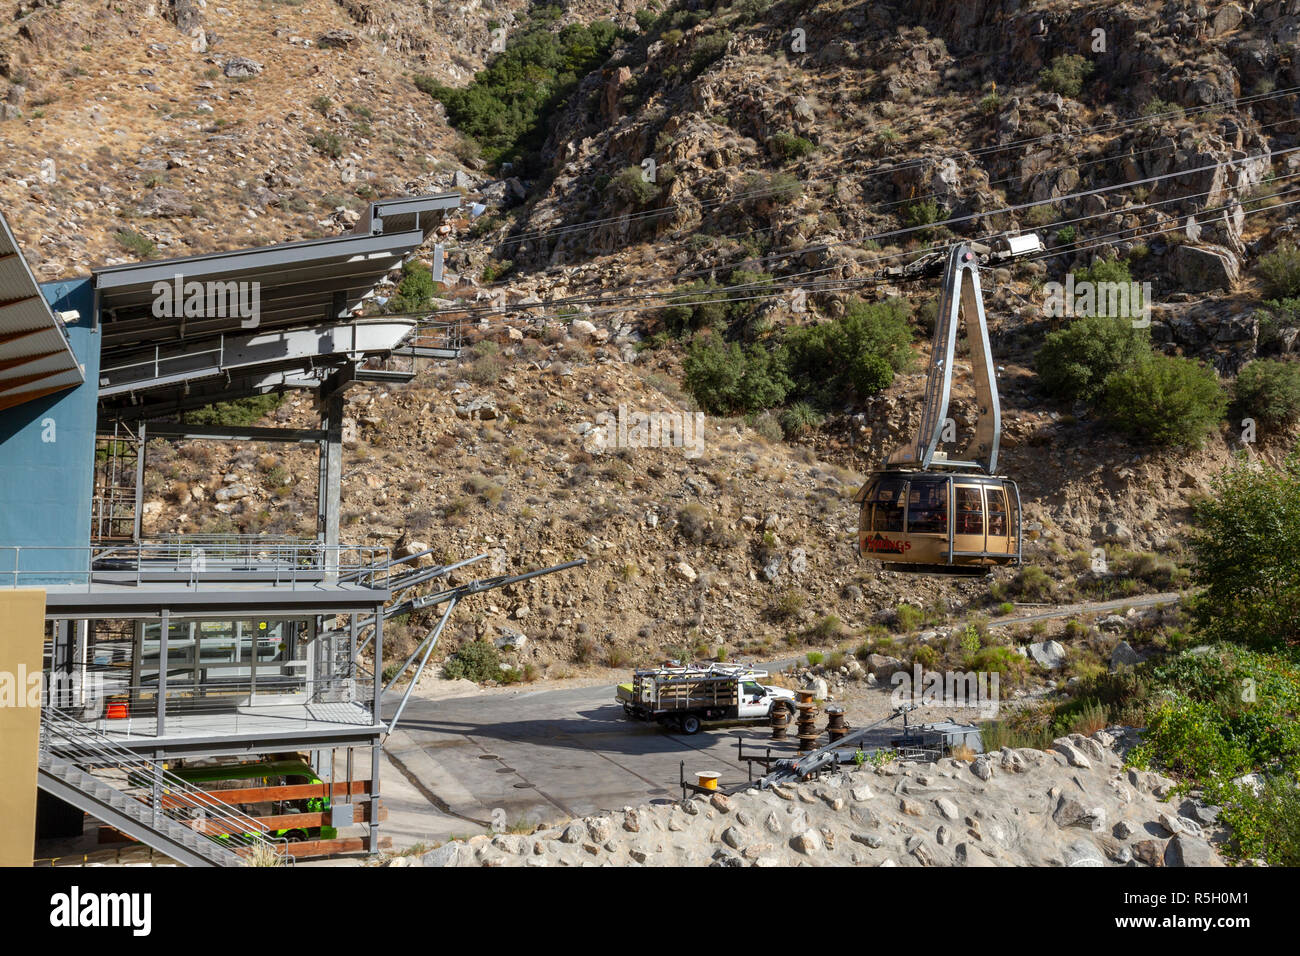 Palm Springs Aerial Tramway tramcar arriving at the lower station, Palm Springs, California, United States. Stock Photo